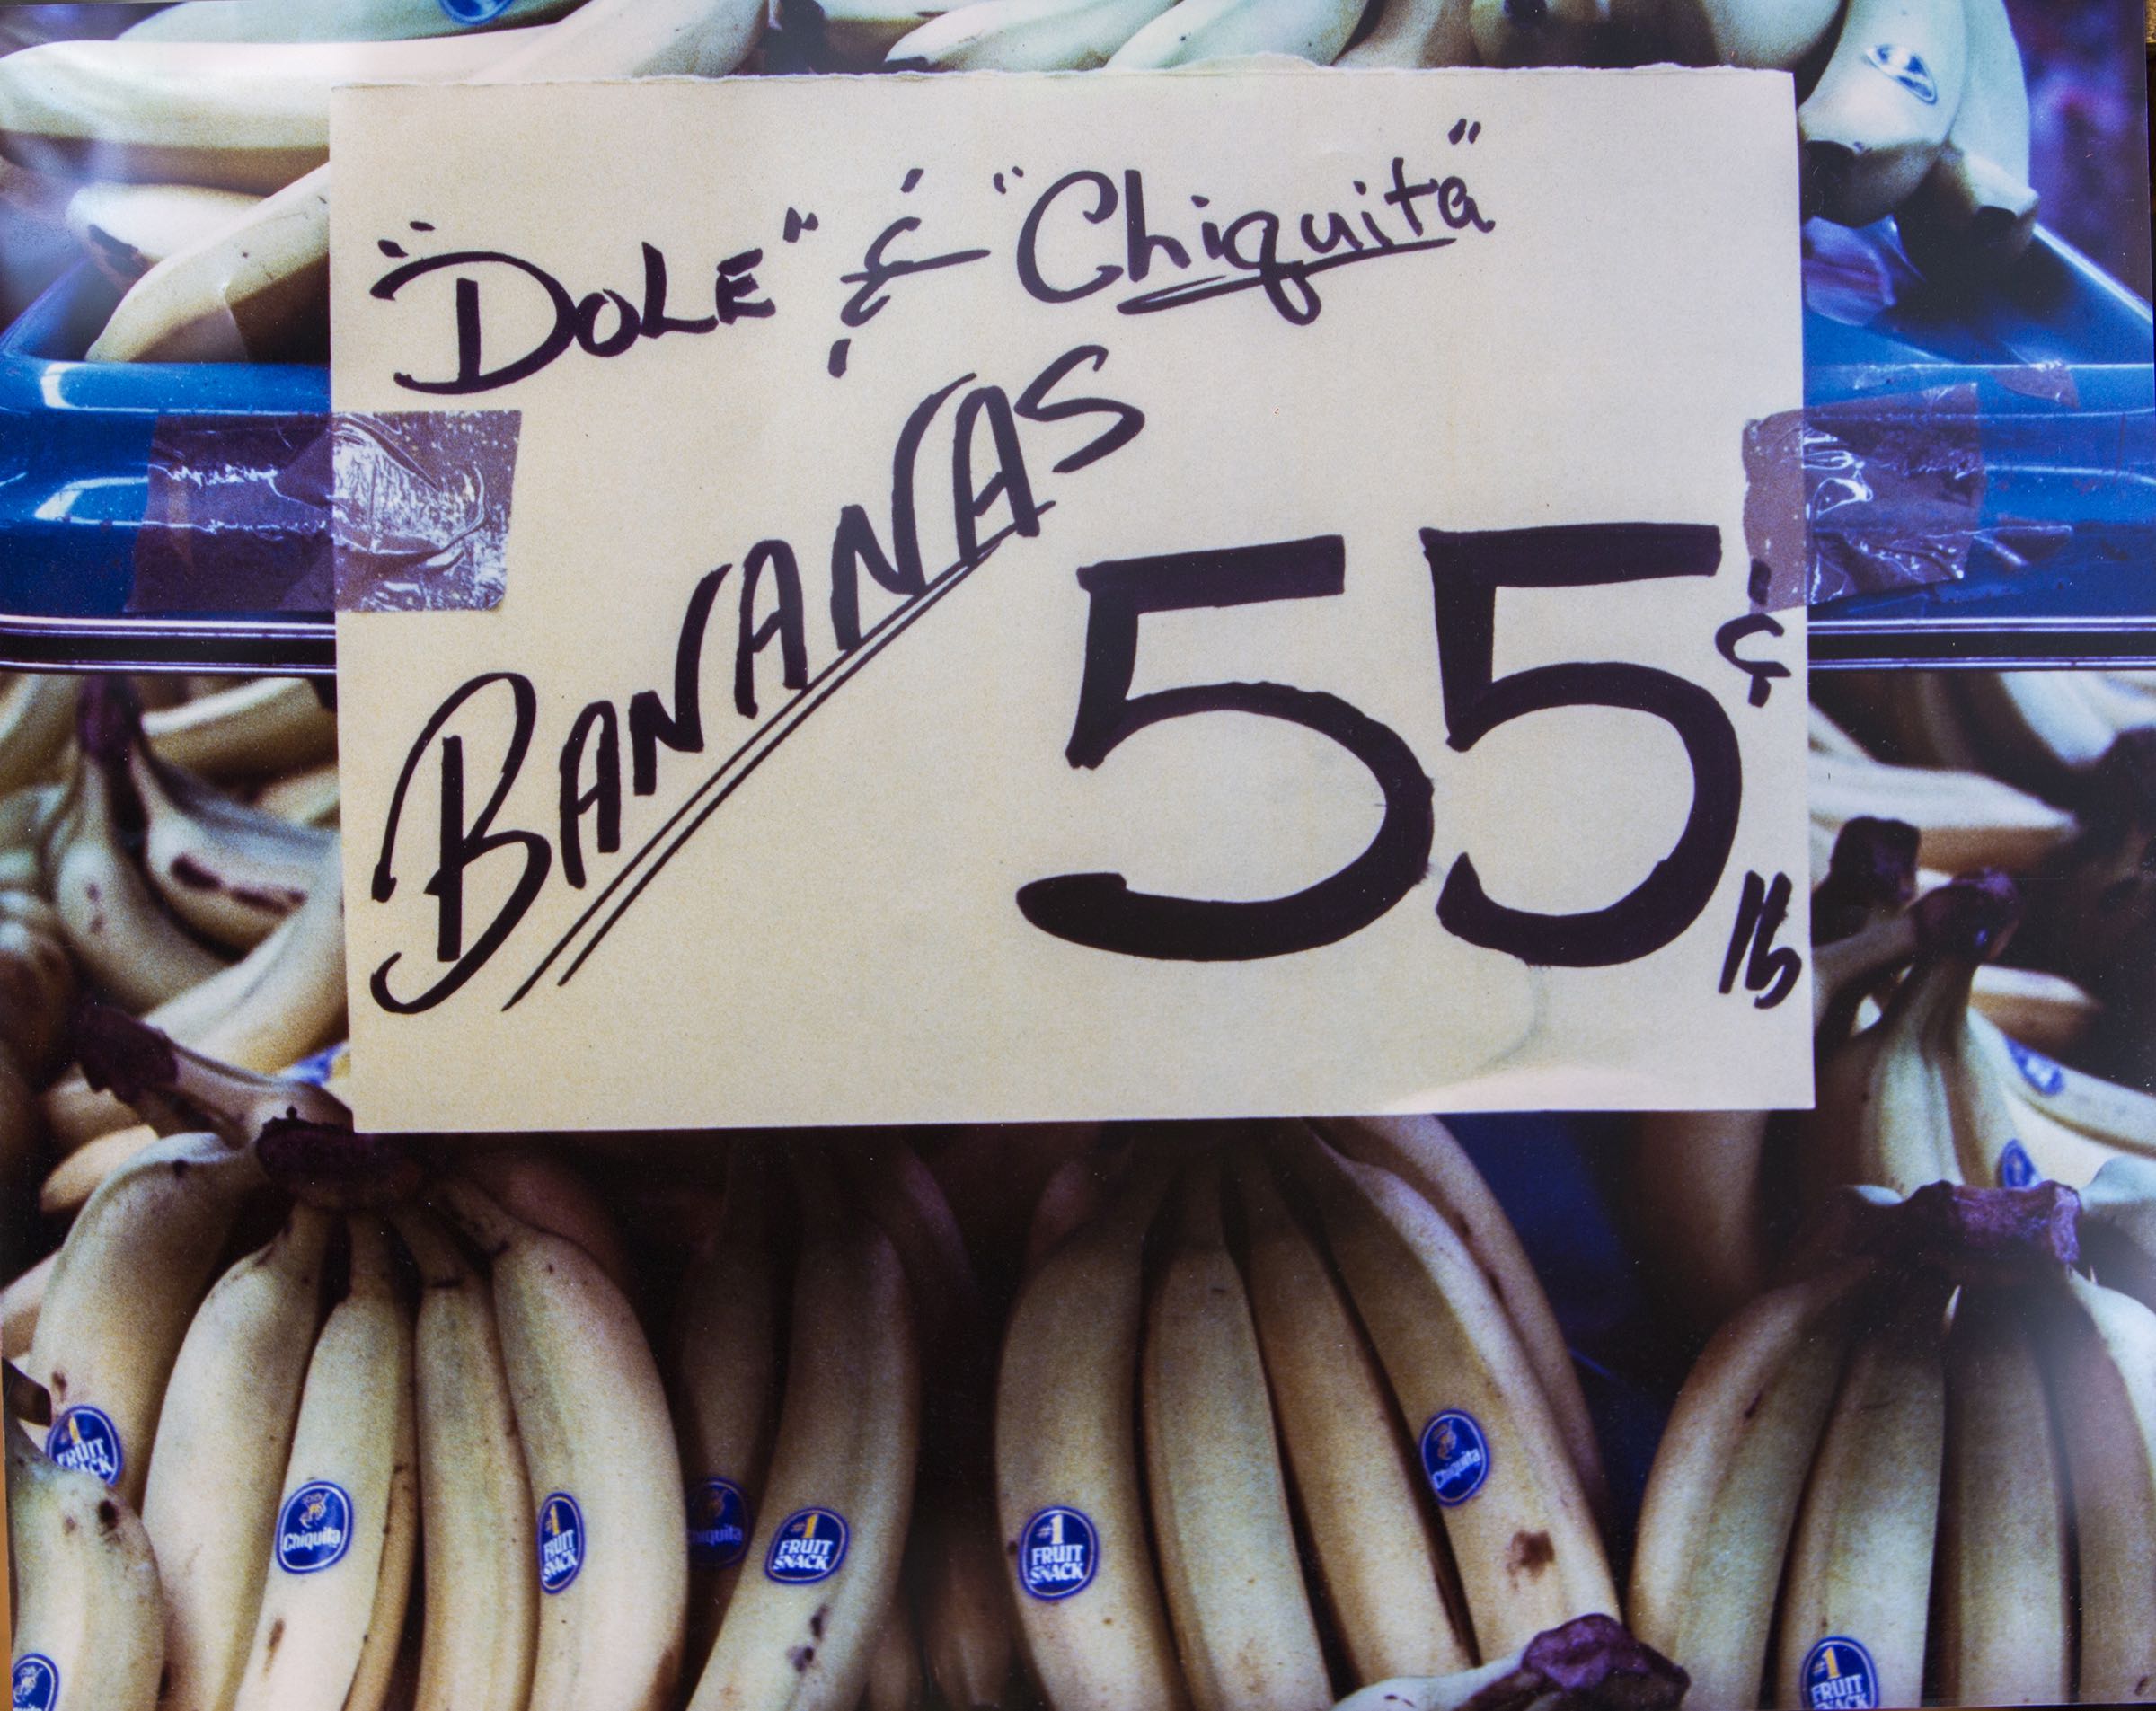 Chiquita bananas being sold in a supermarket.